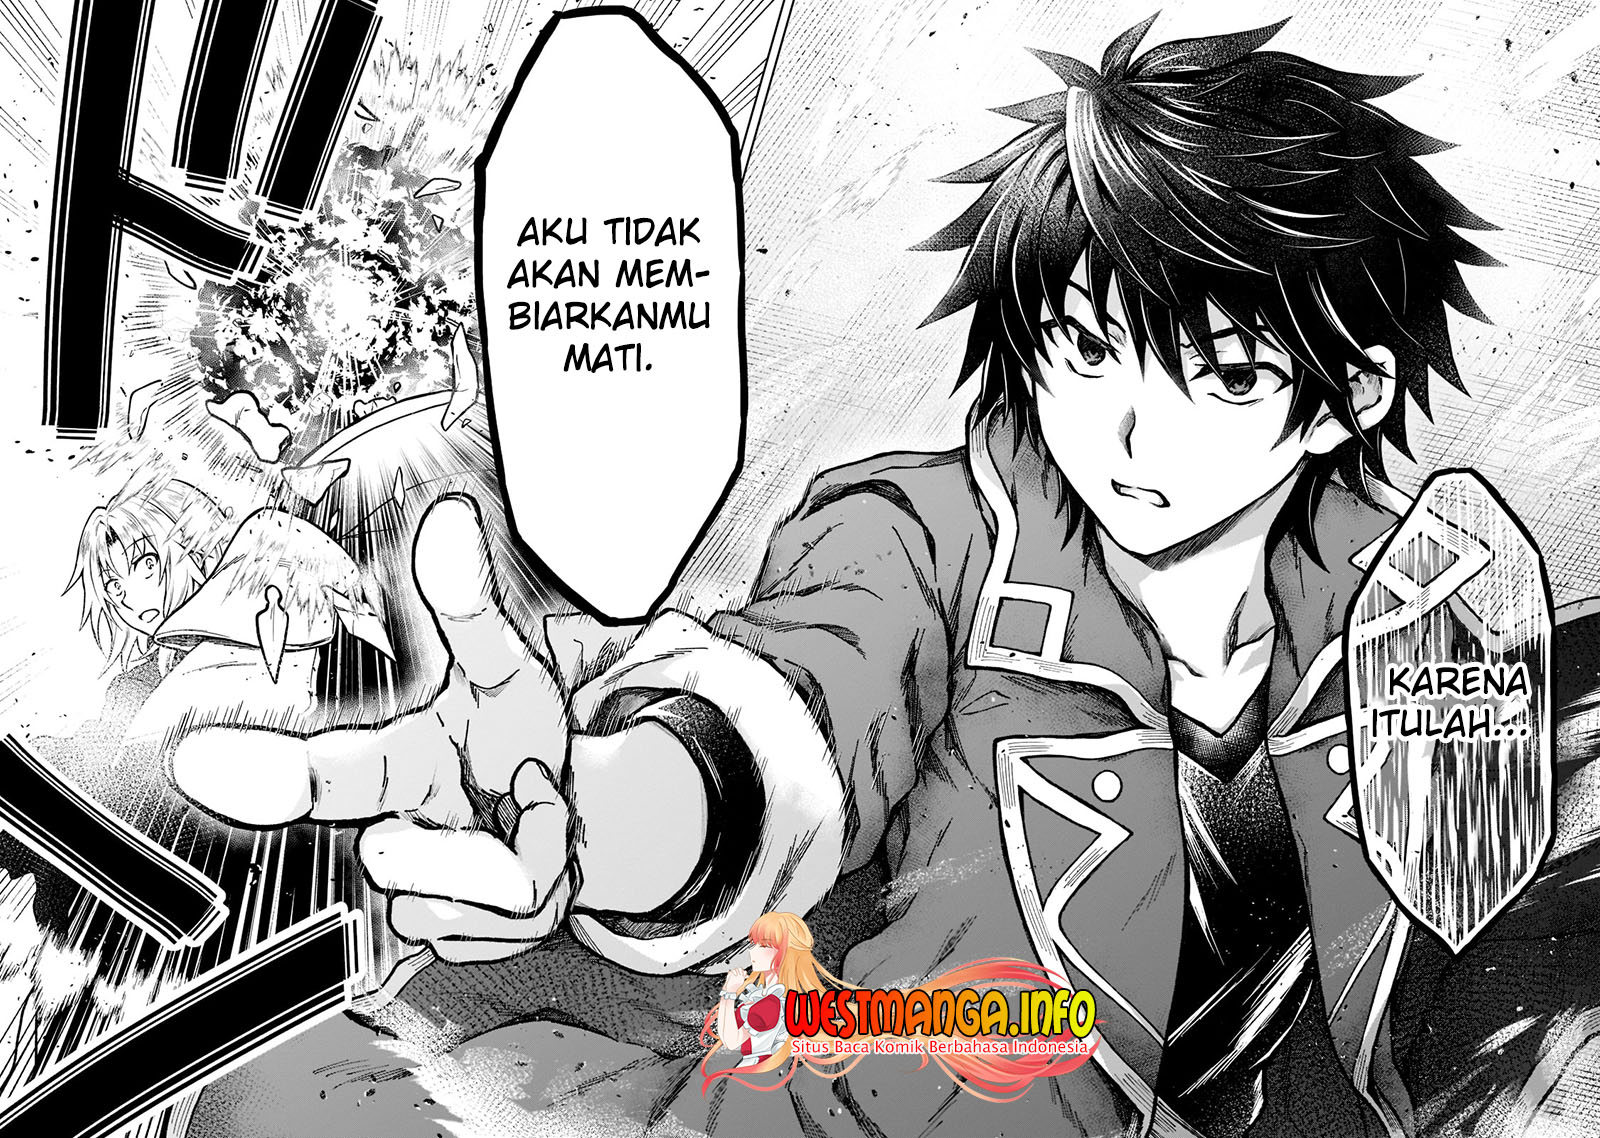 Dilarang COPAS - situs resmi www.mangacanblog.com - Komik d rank adventurer invited by a brave party and the stalking princess 011 - chapter 11 12 Indonesia d rank adventurer invited by a brave party and the stalking princess 011 - chapter 11 Terbaru 22|Baca Manga Komik Indonesia|Mangacan